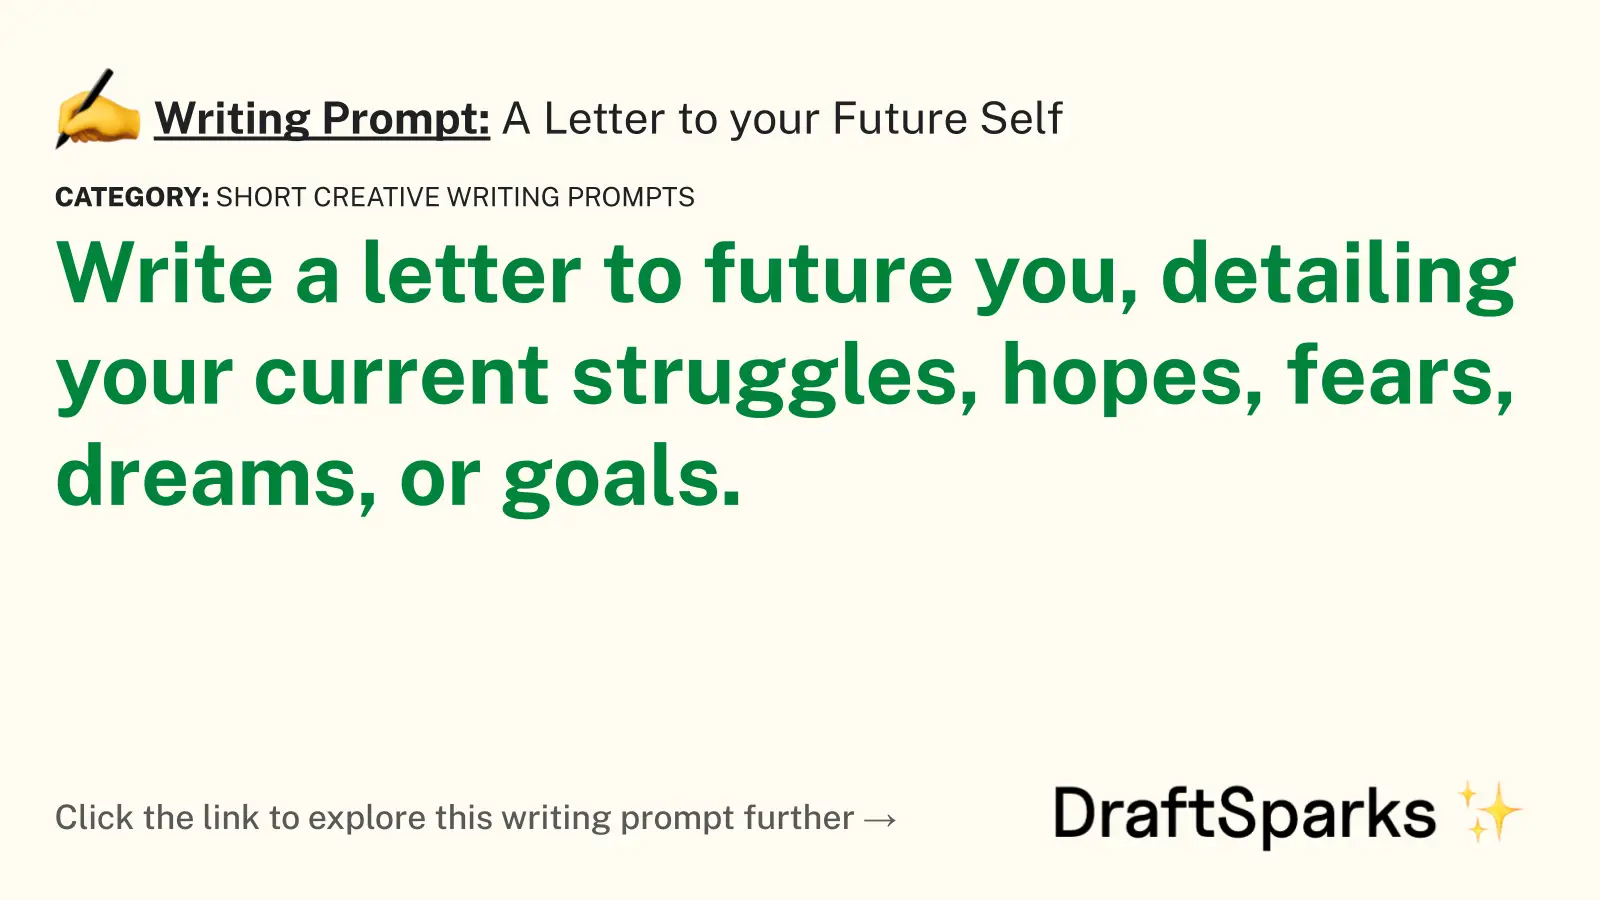 A Letter to your Future Self